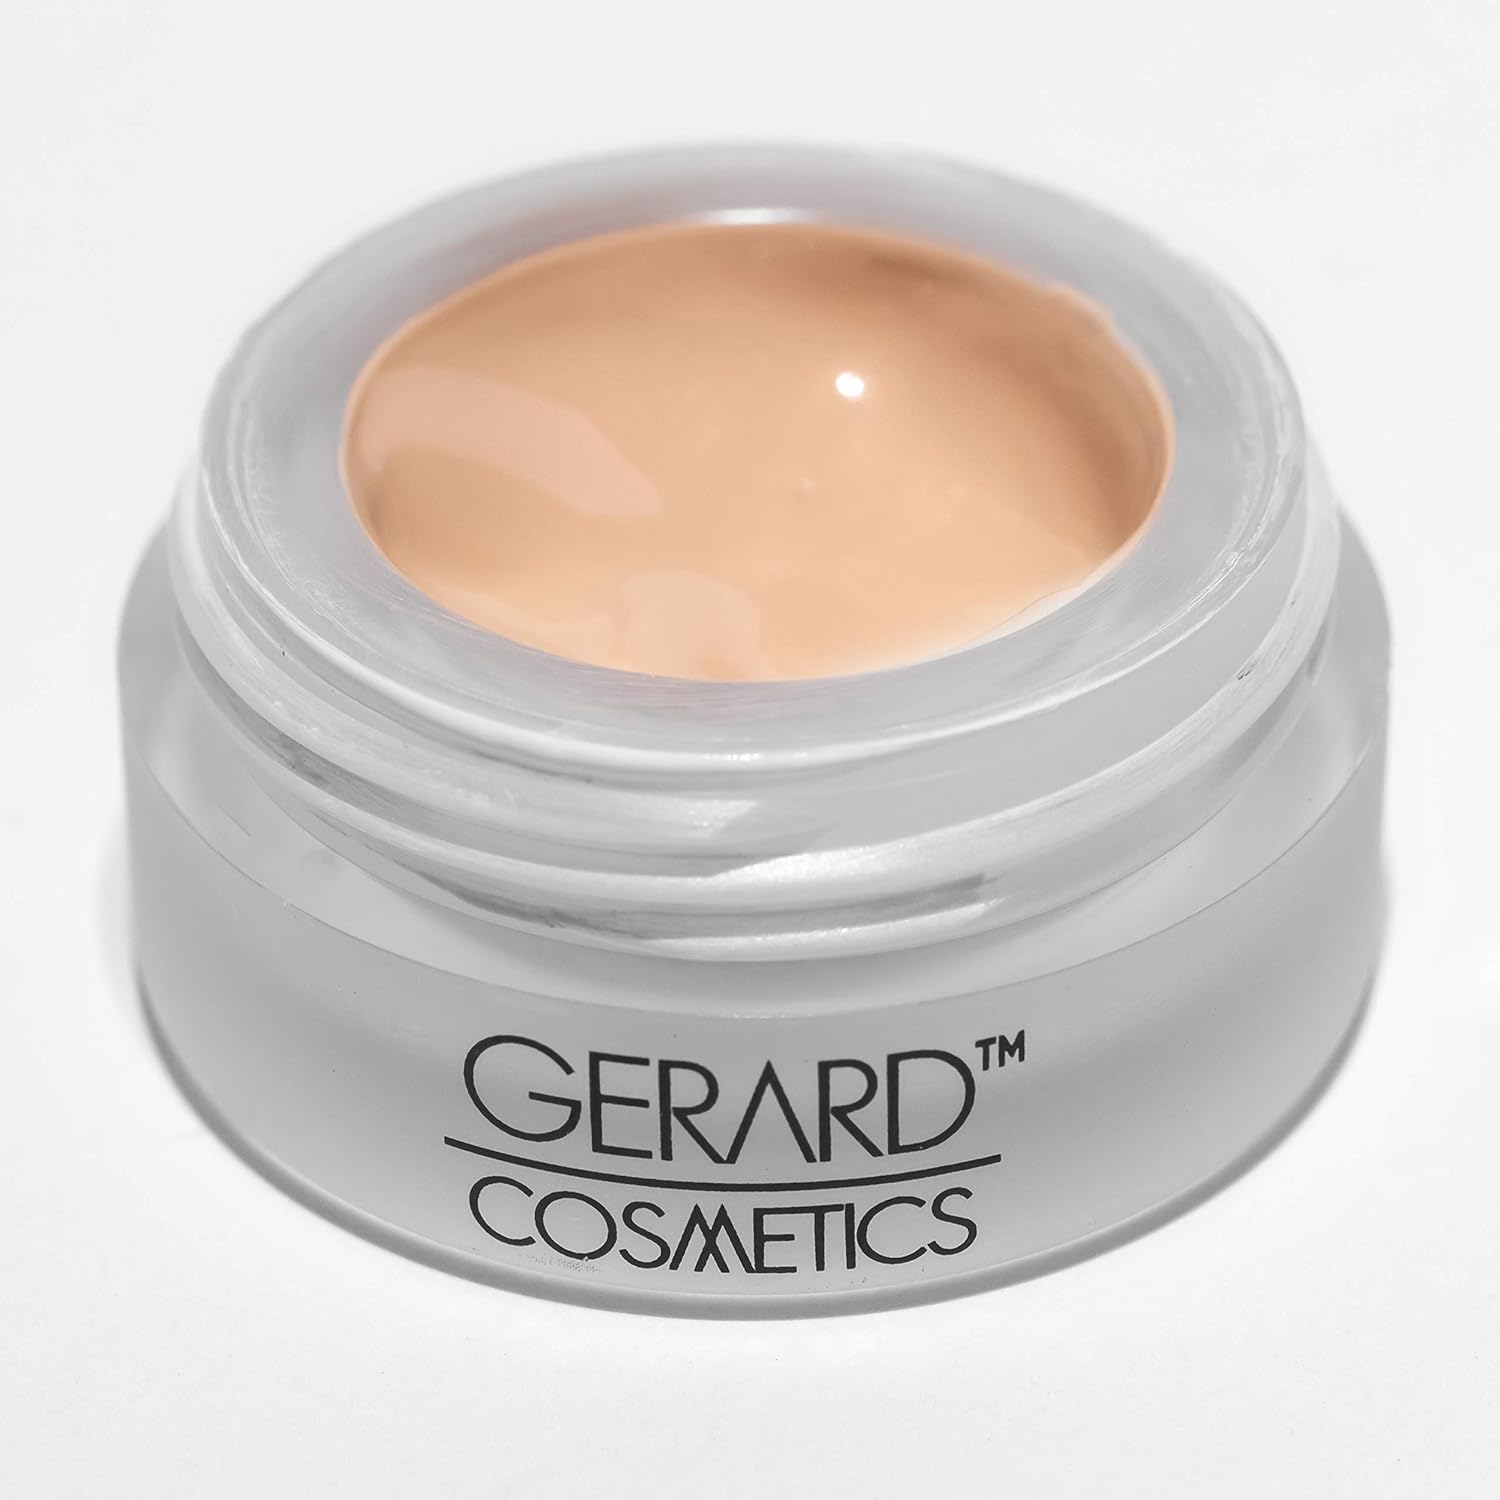  Gerard Cosmetics Clean Canvas FAIR Eye Concealer and Base Smudge Proof | Makeup Primer and Eyeshadow Base | Made in the USA | Vegan Formula | Cruelty Free